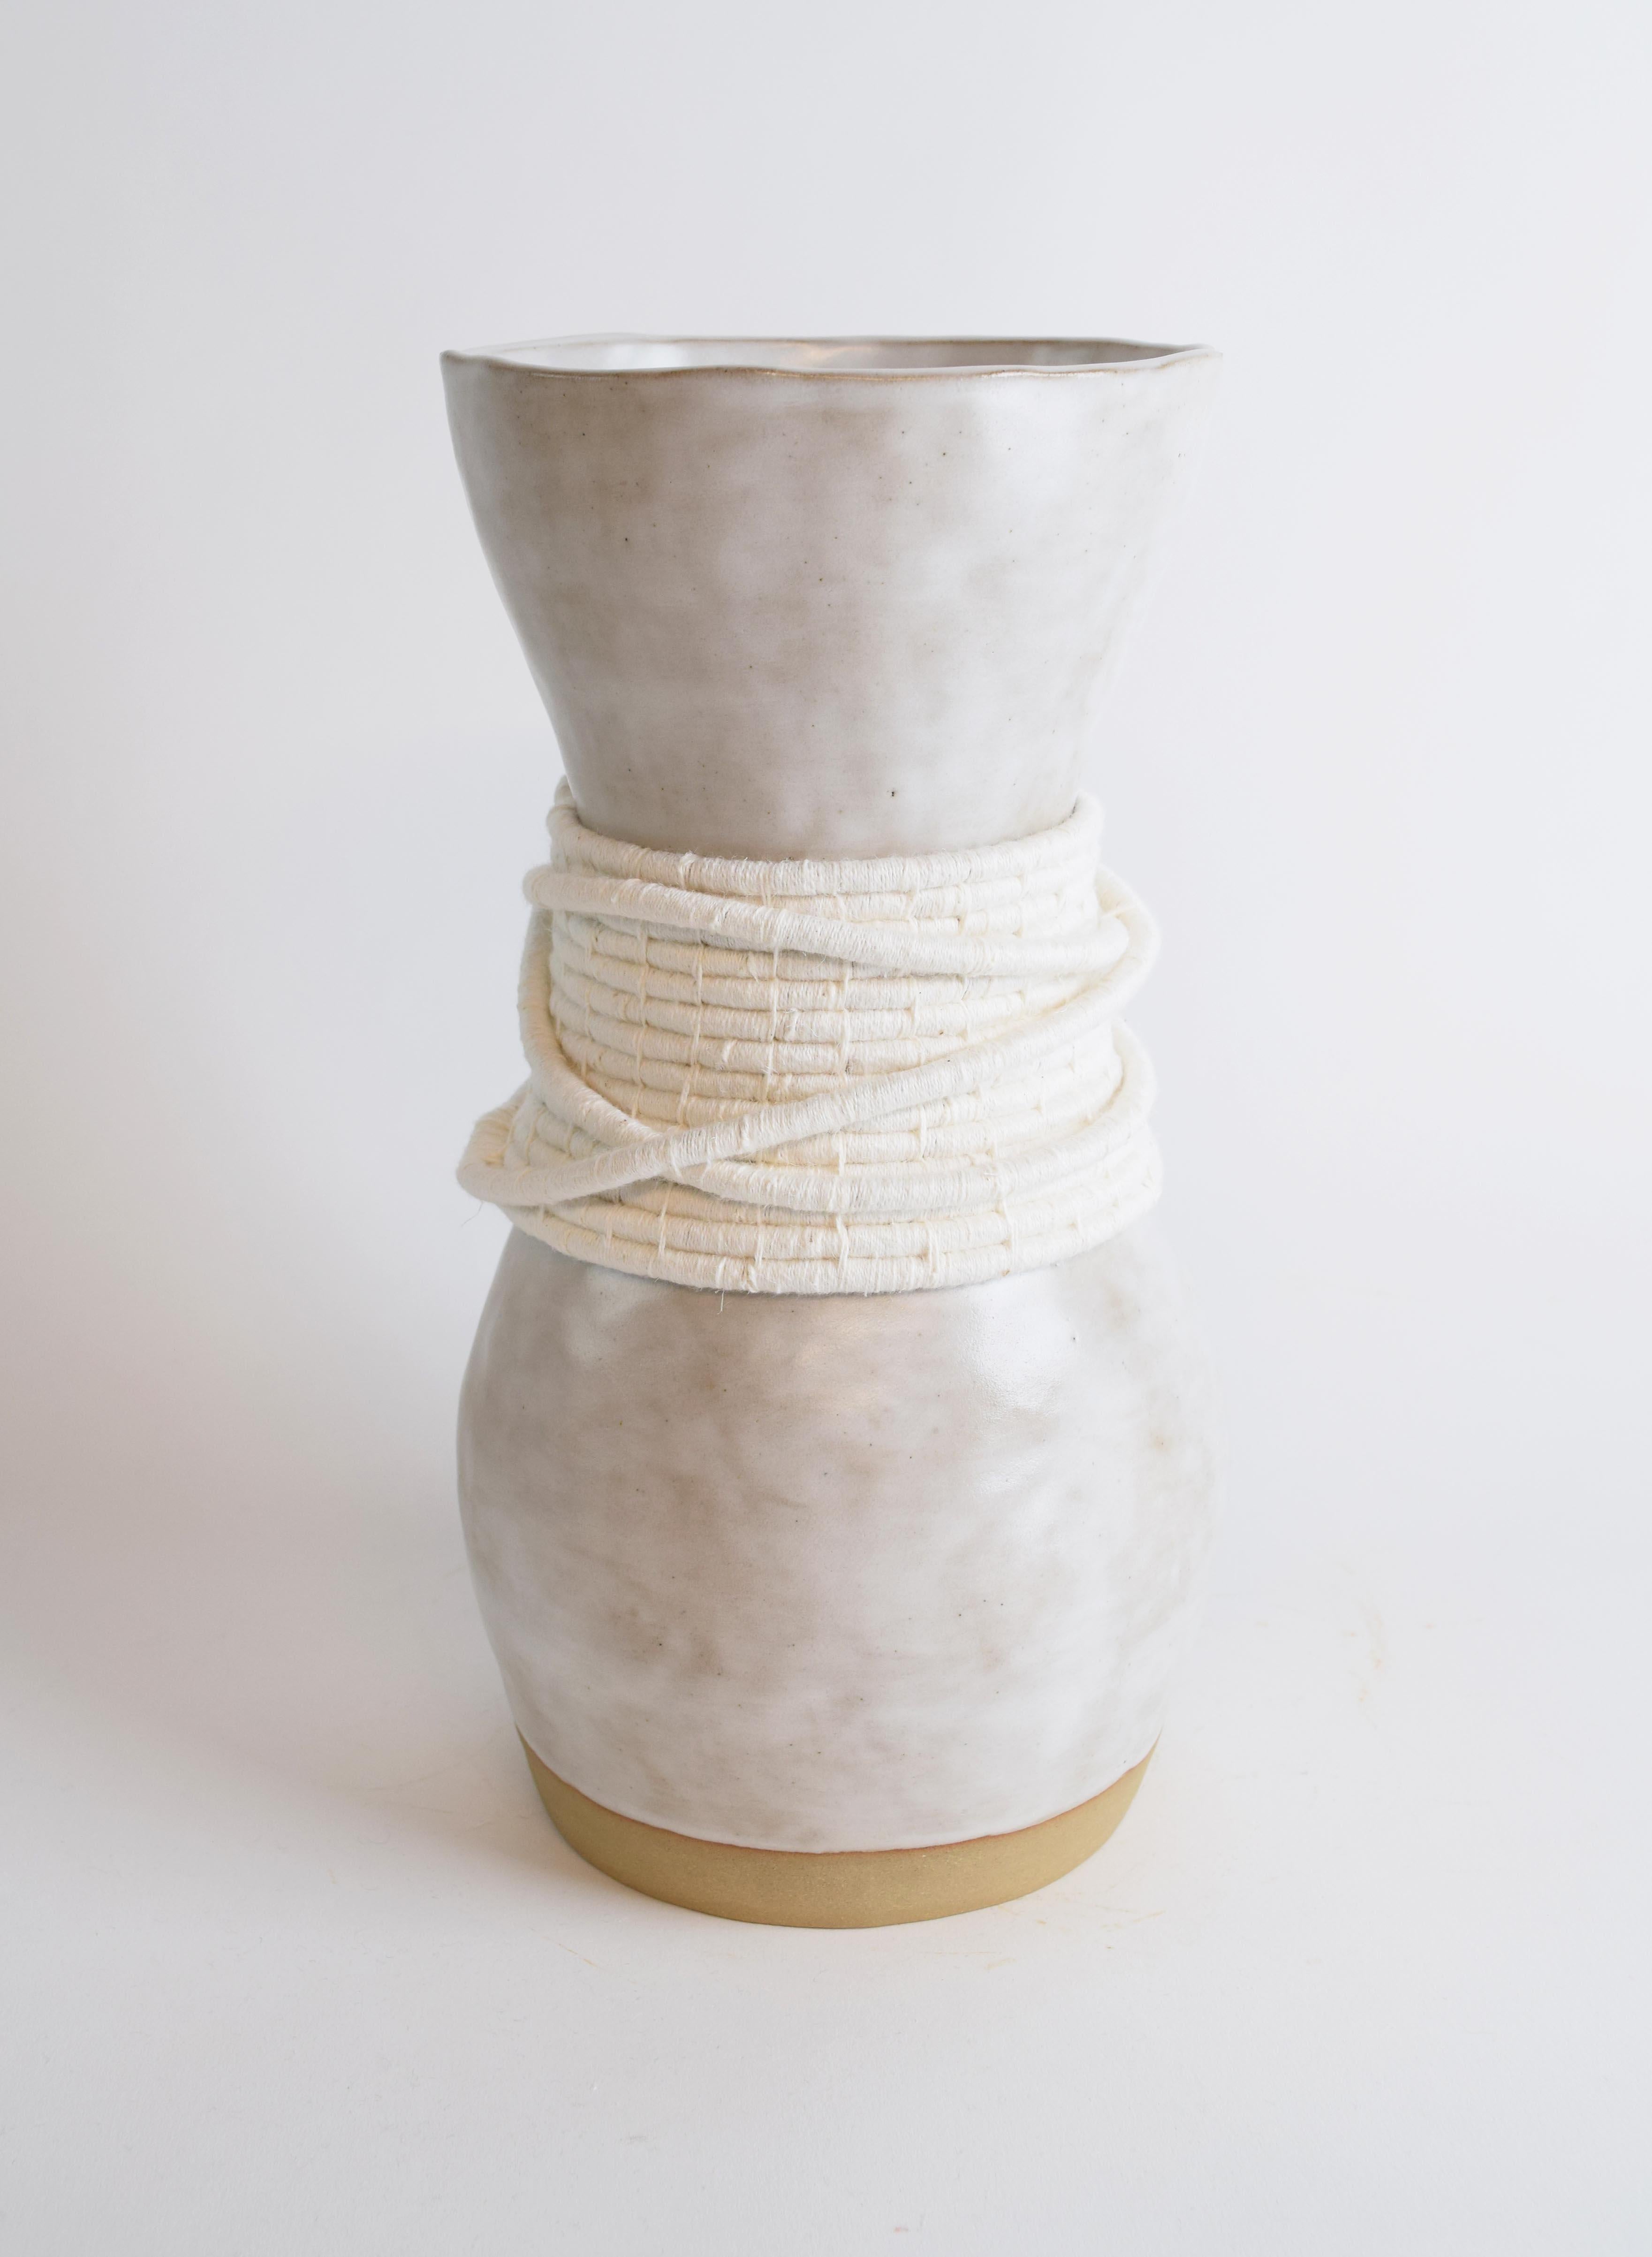 American One of a Kind Ceramic & Fiber Vase #809  - White Glaze with Woven White Cotton For Sale